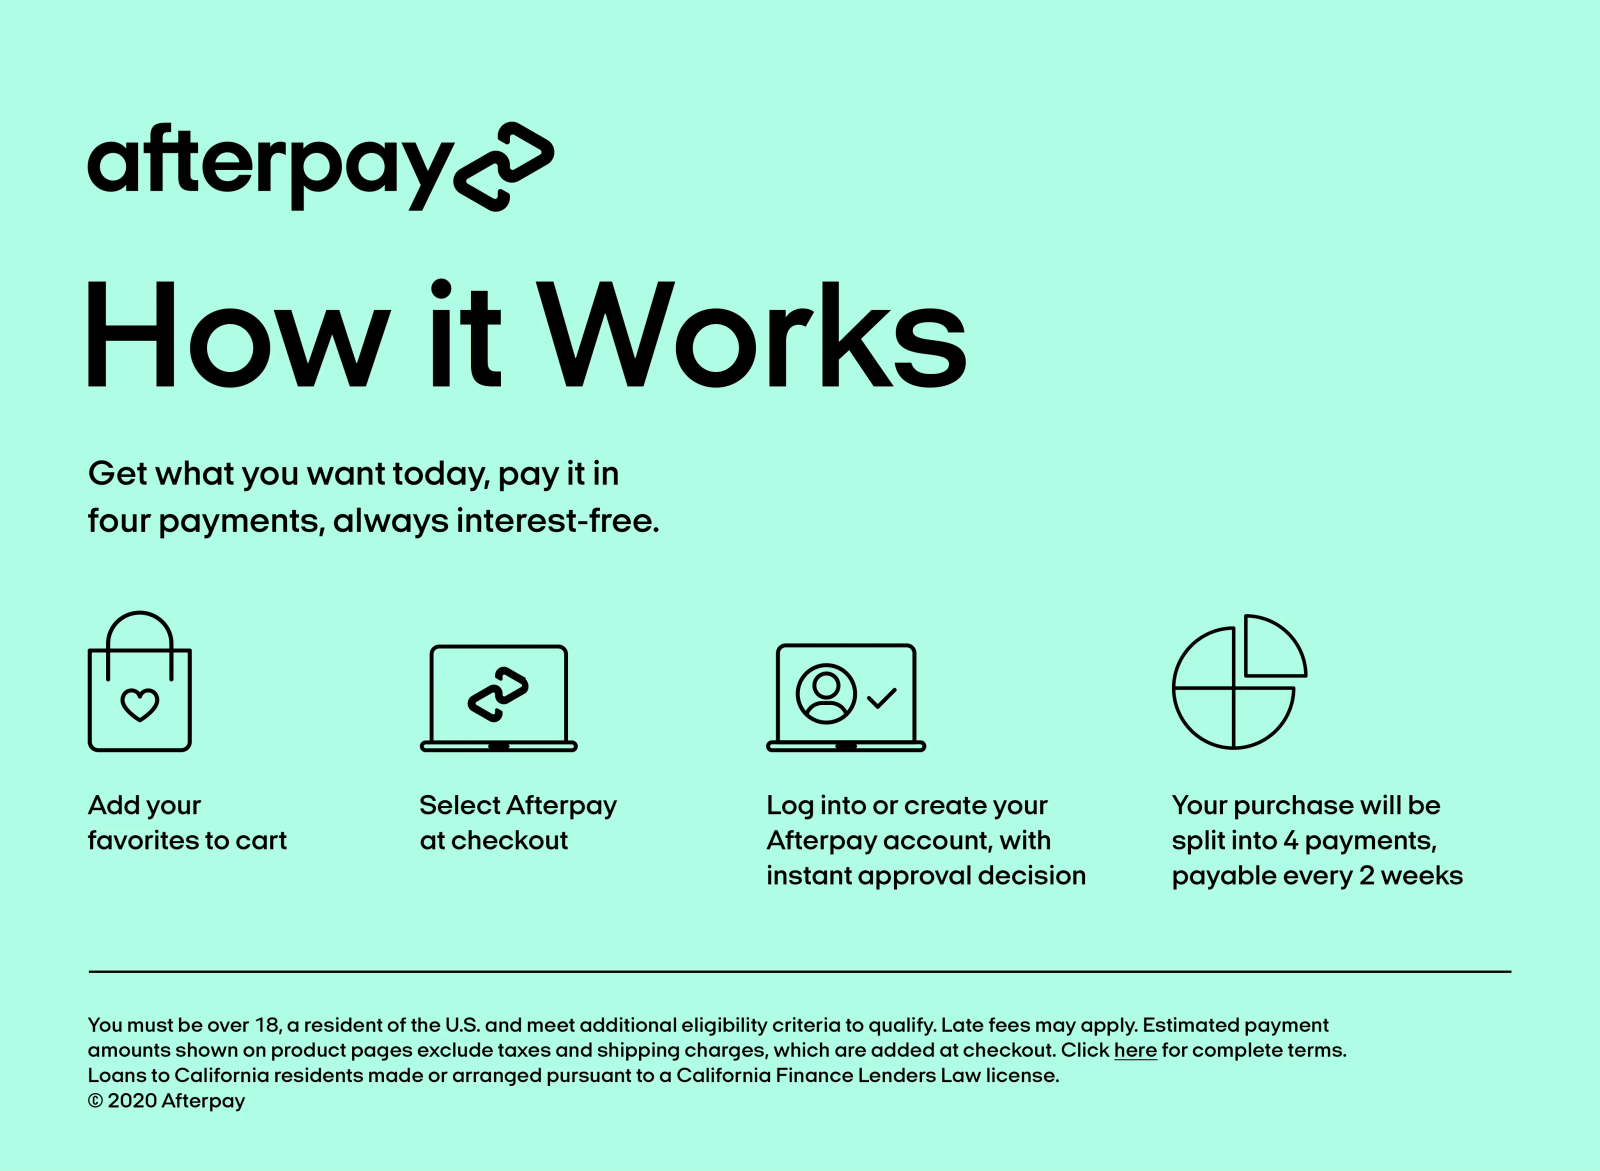 Afterpay how it works